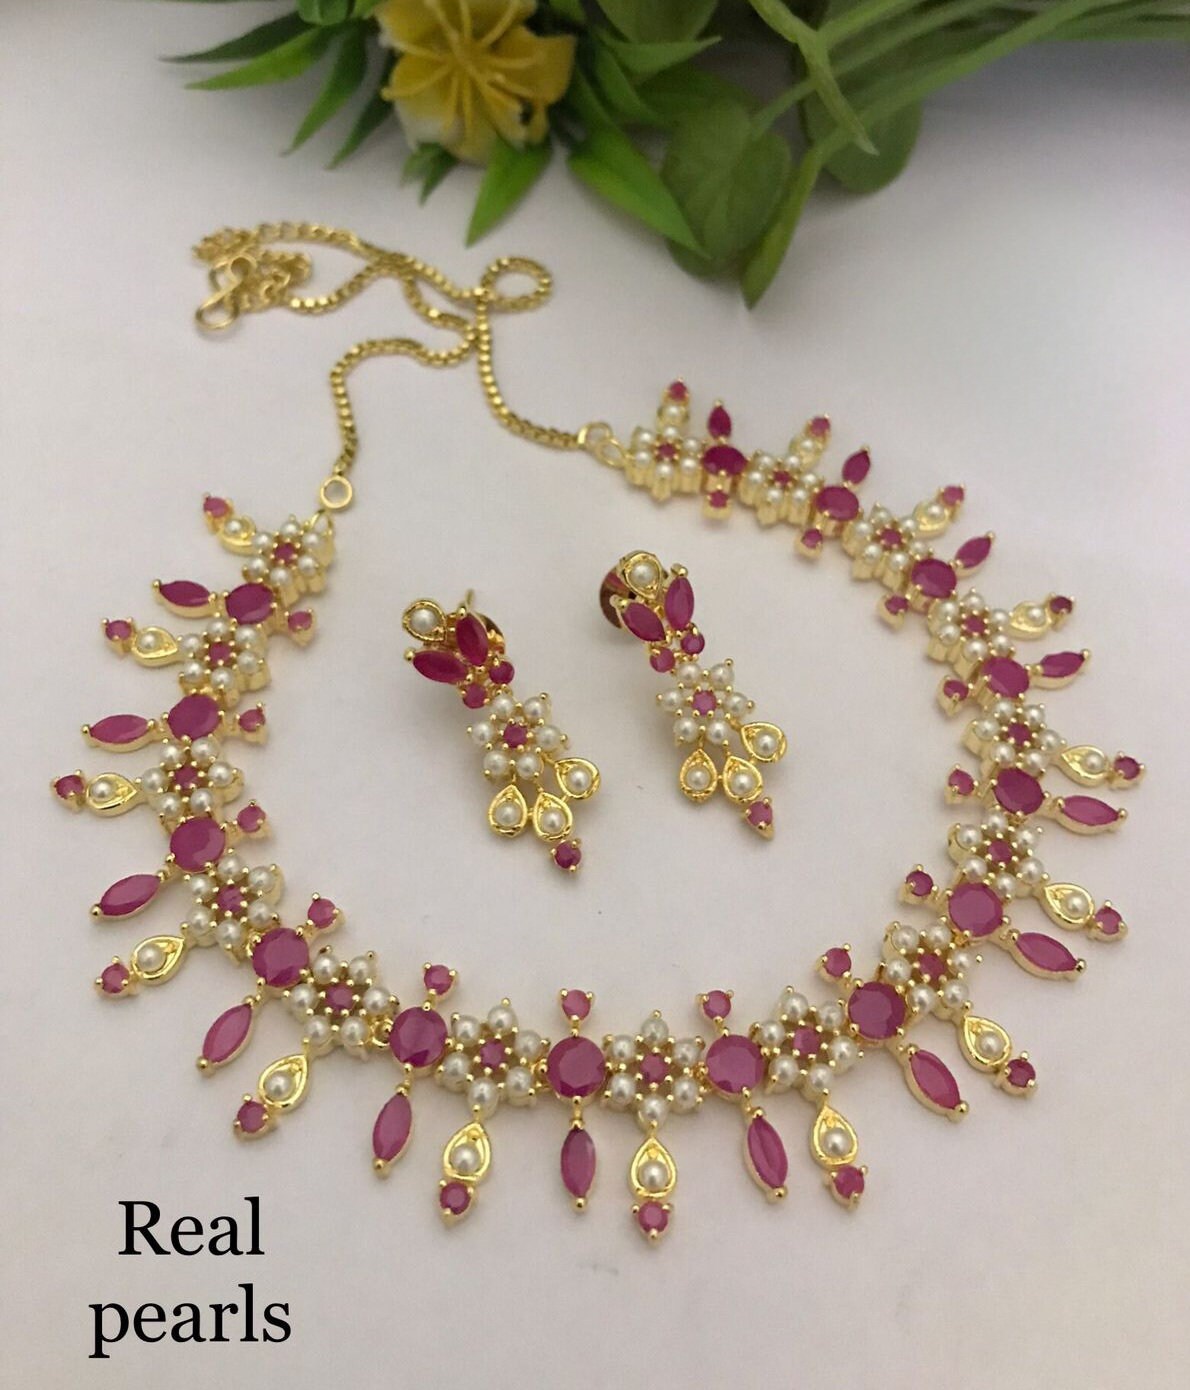 Gold Plated American Diamond Pearls, Ruby and Emerald CZ stone Necklace Earring set|Indian Jewelry|Statement jewelry|Birth day Gift for her